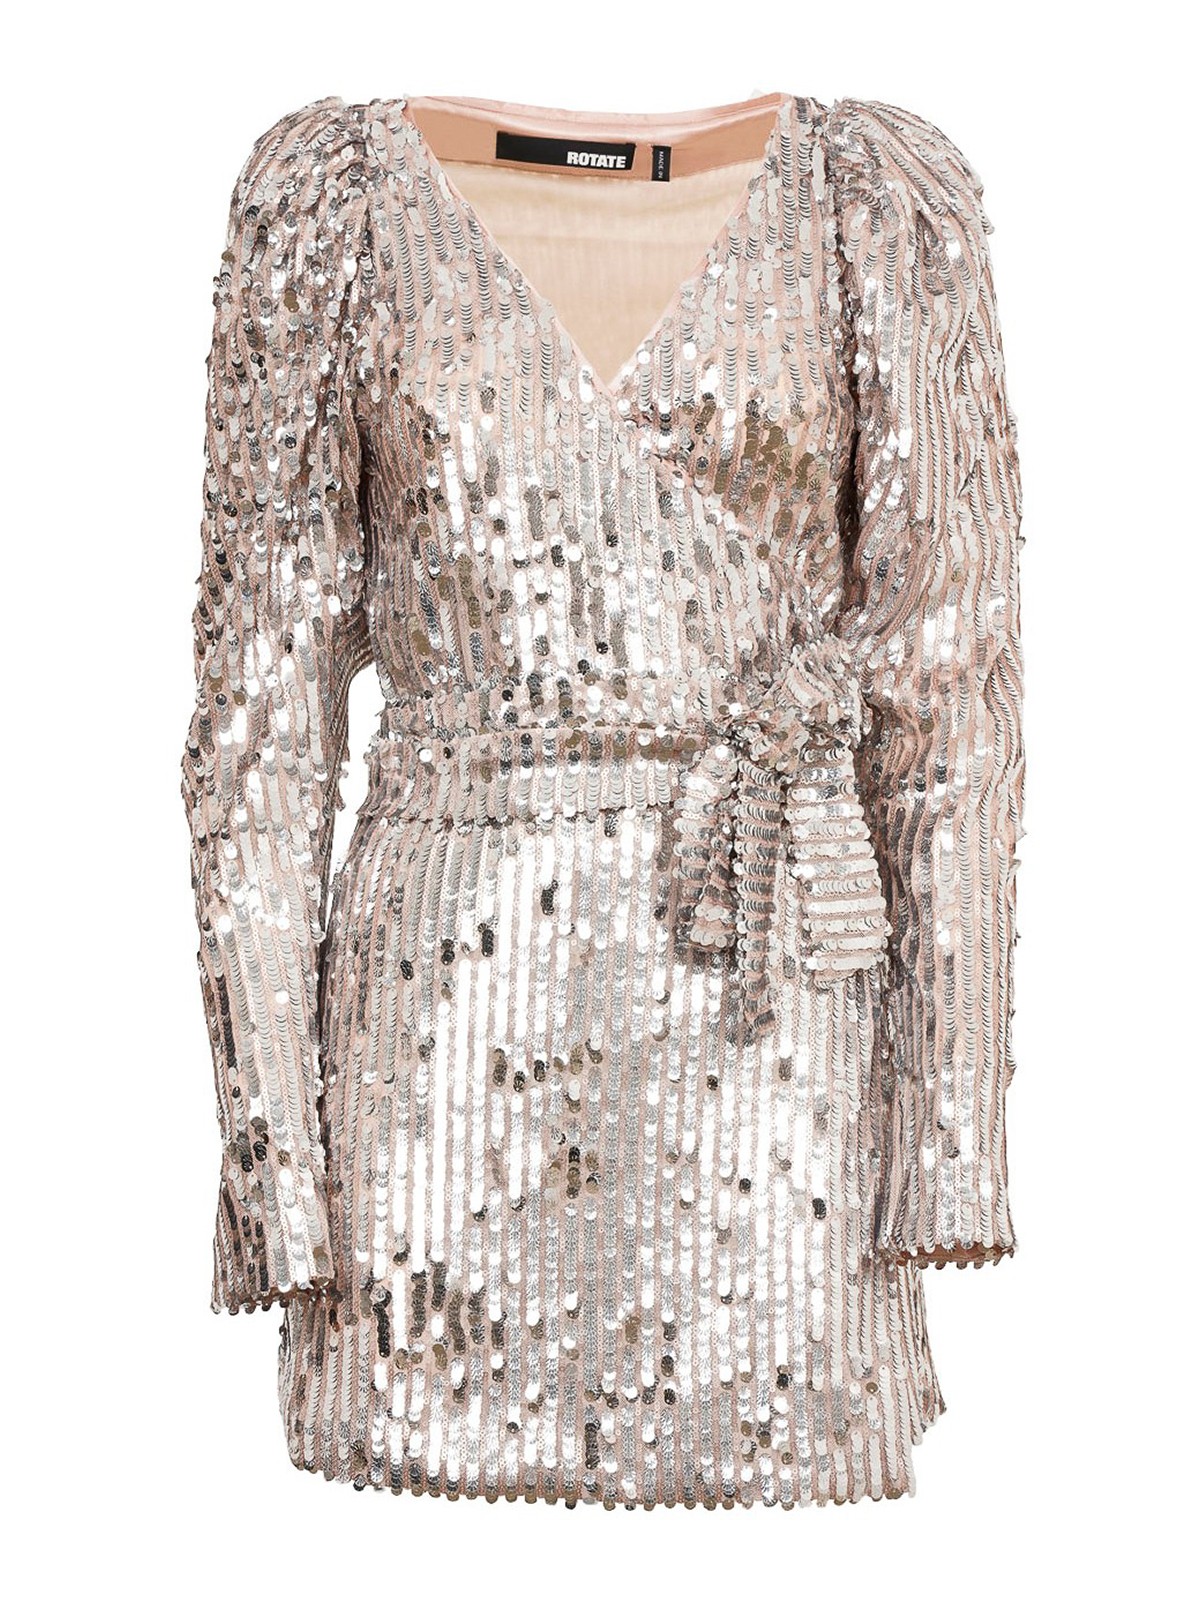 Rotate Birger Christensen Belted Wrap Sequined Dressed In Silver